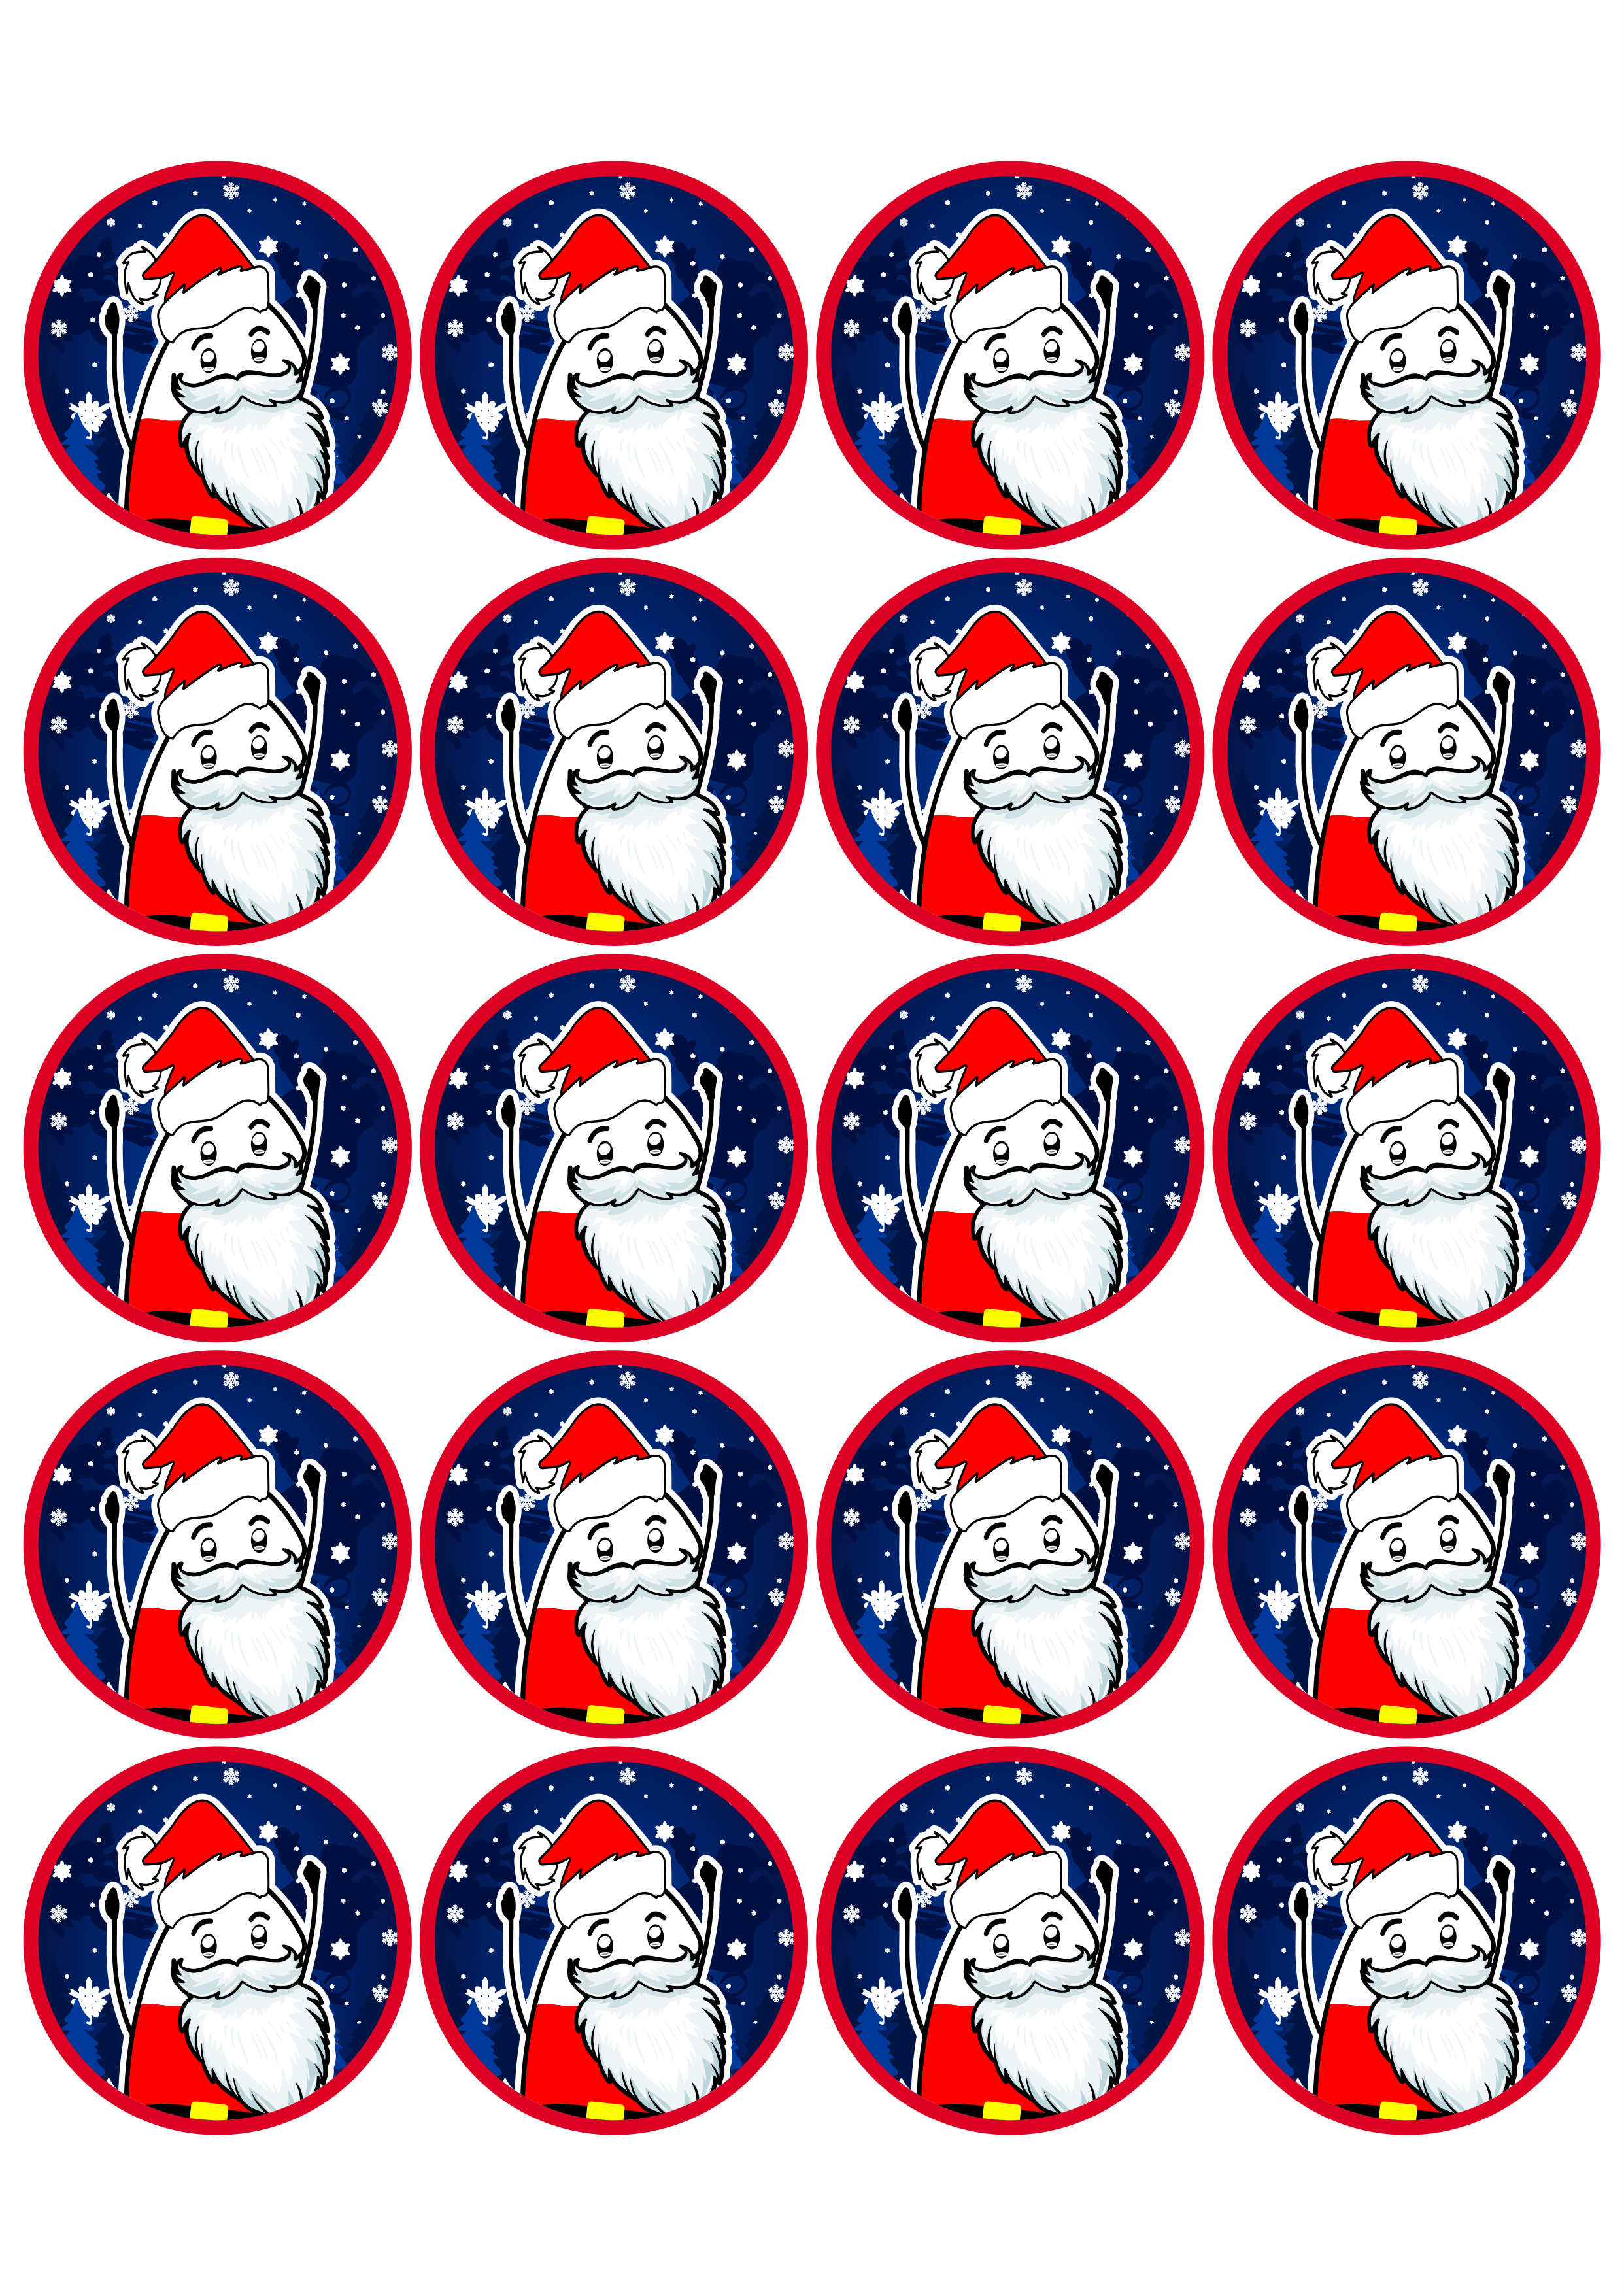 Flork of cows papai noel adesivos stickers tags 20 unidades png